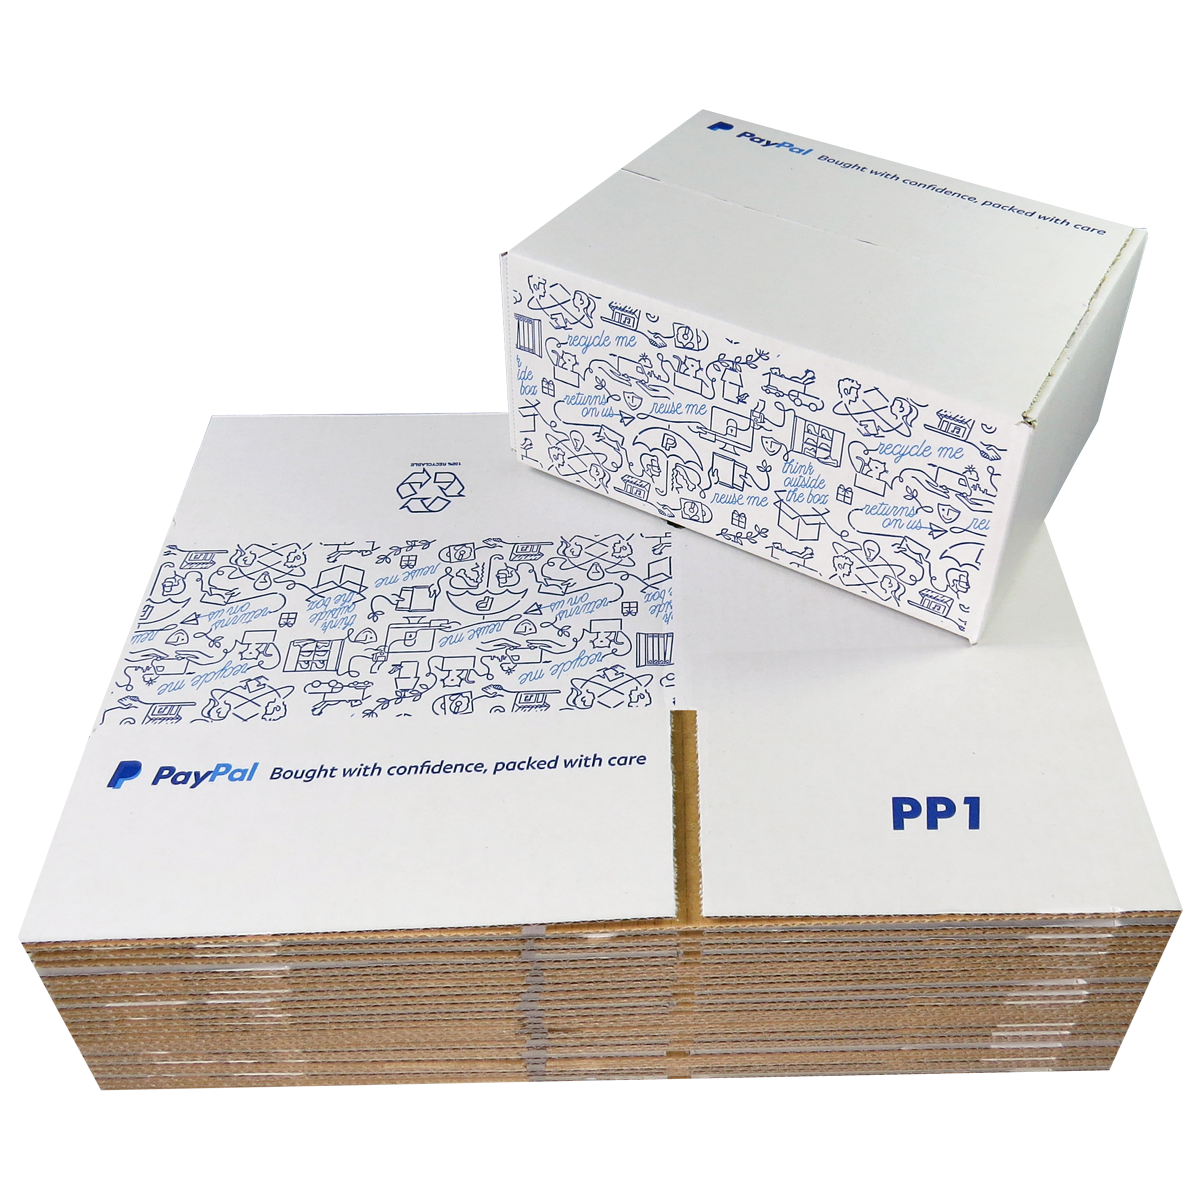 3200 x PP1 PayPal Branded Quality White Single Wall Cardboard Postal Mailing Boxes 200x150x90mm